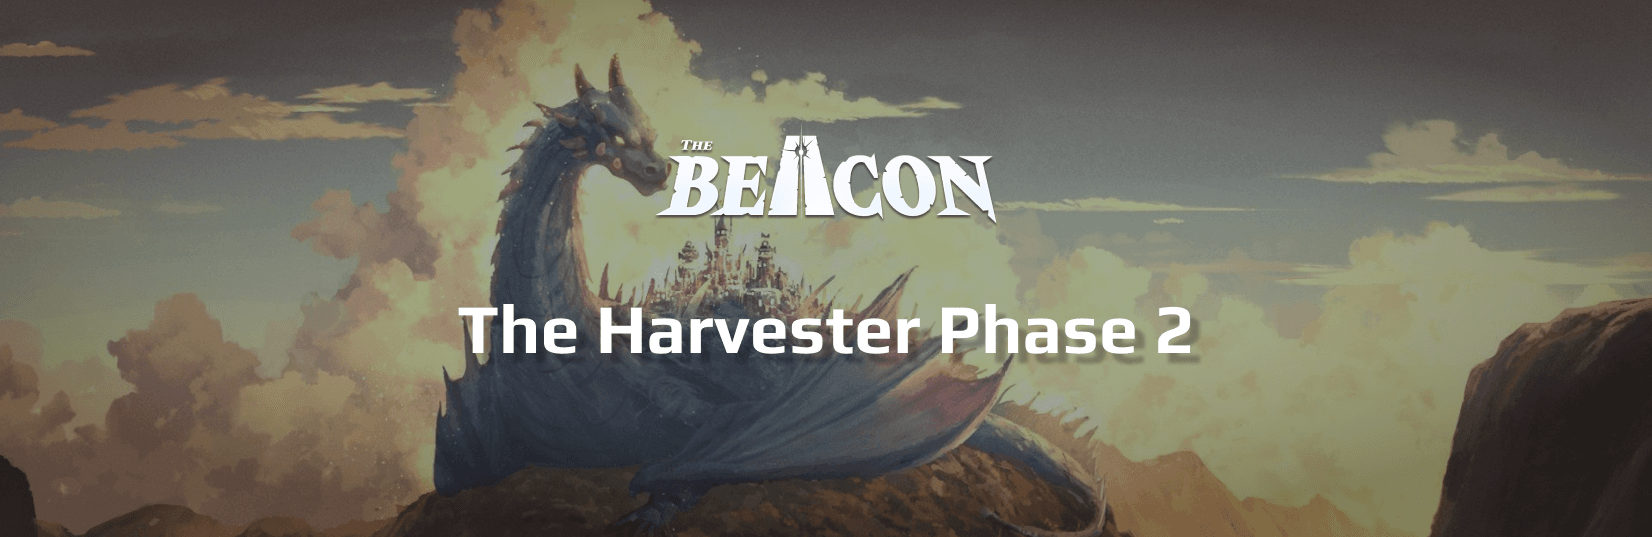 The Beacon Harvester Phase 2